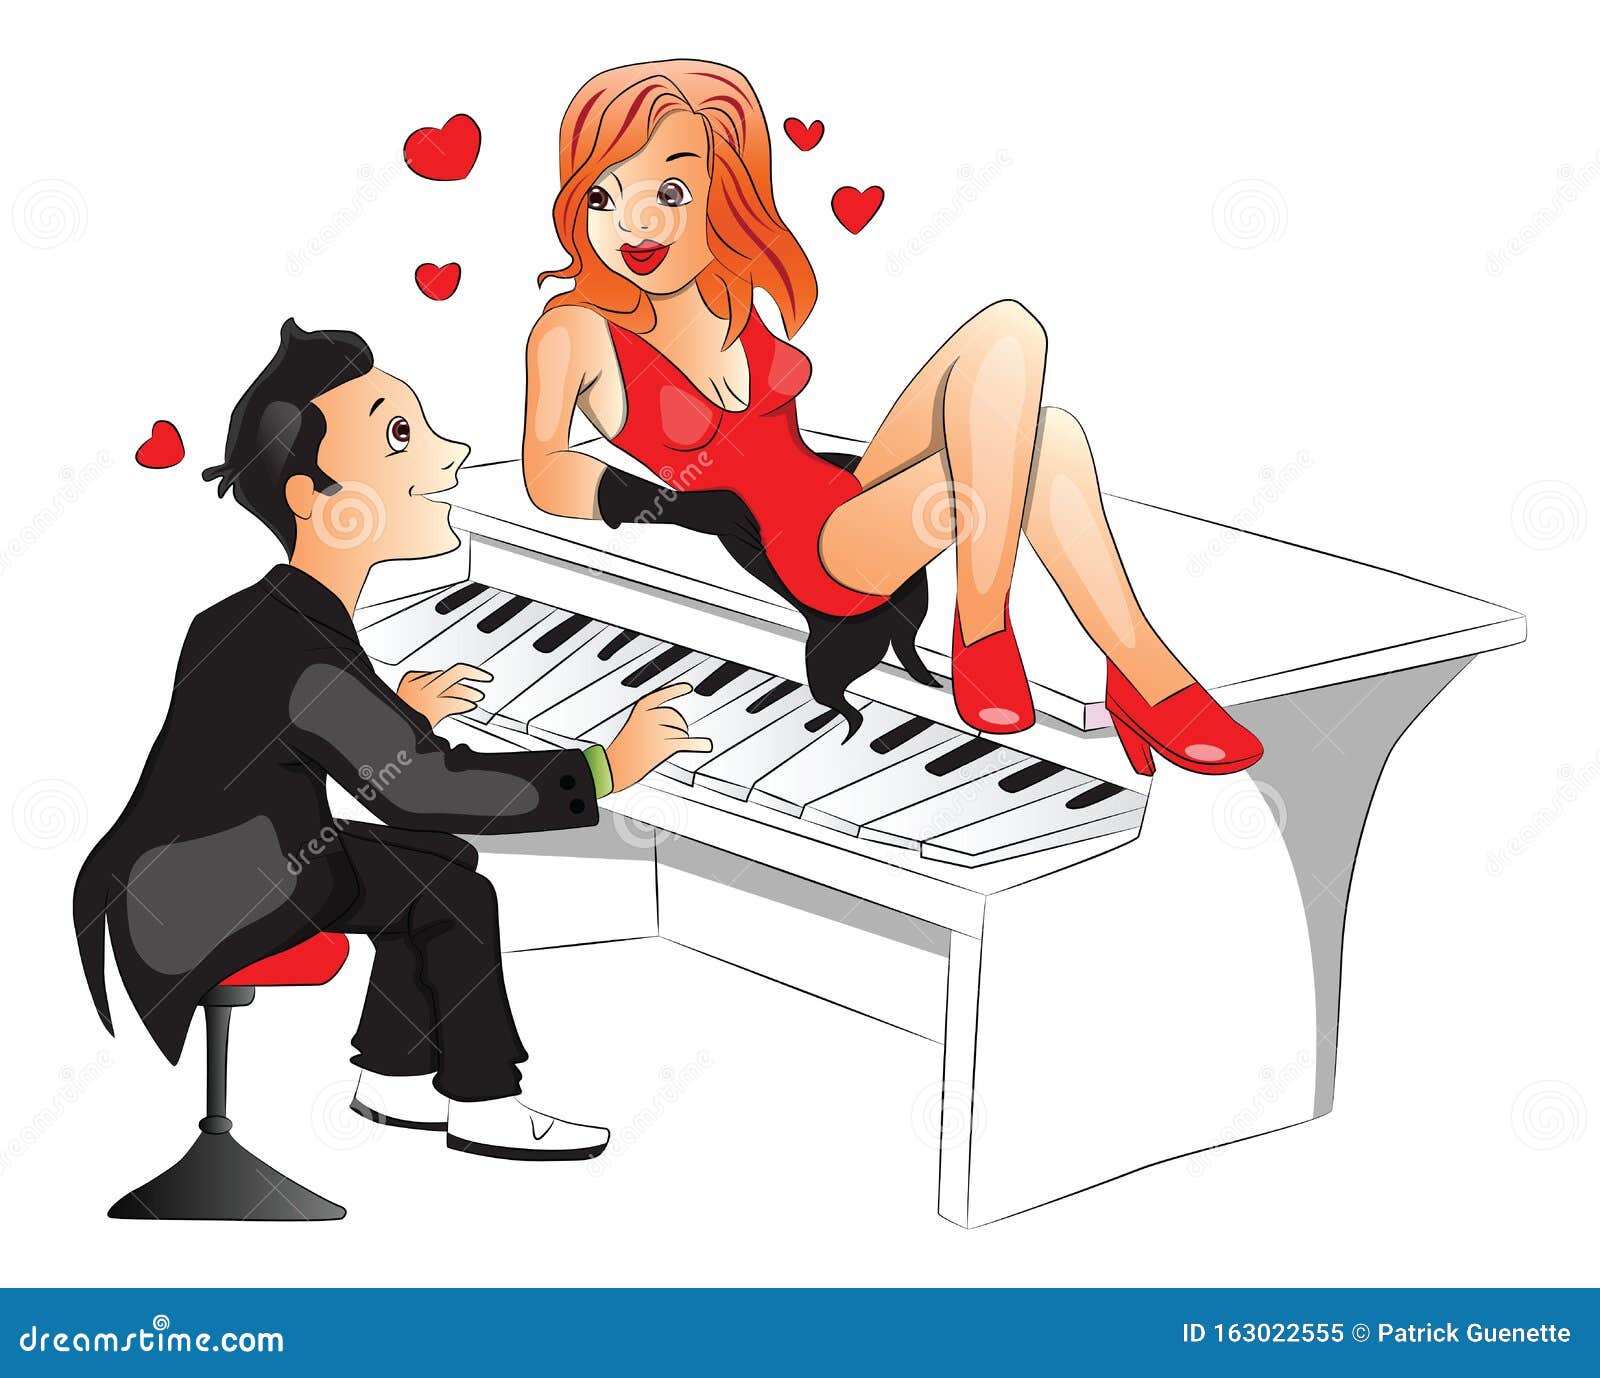 Pianist dating site